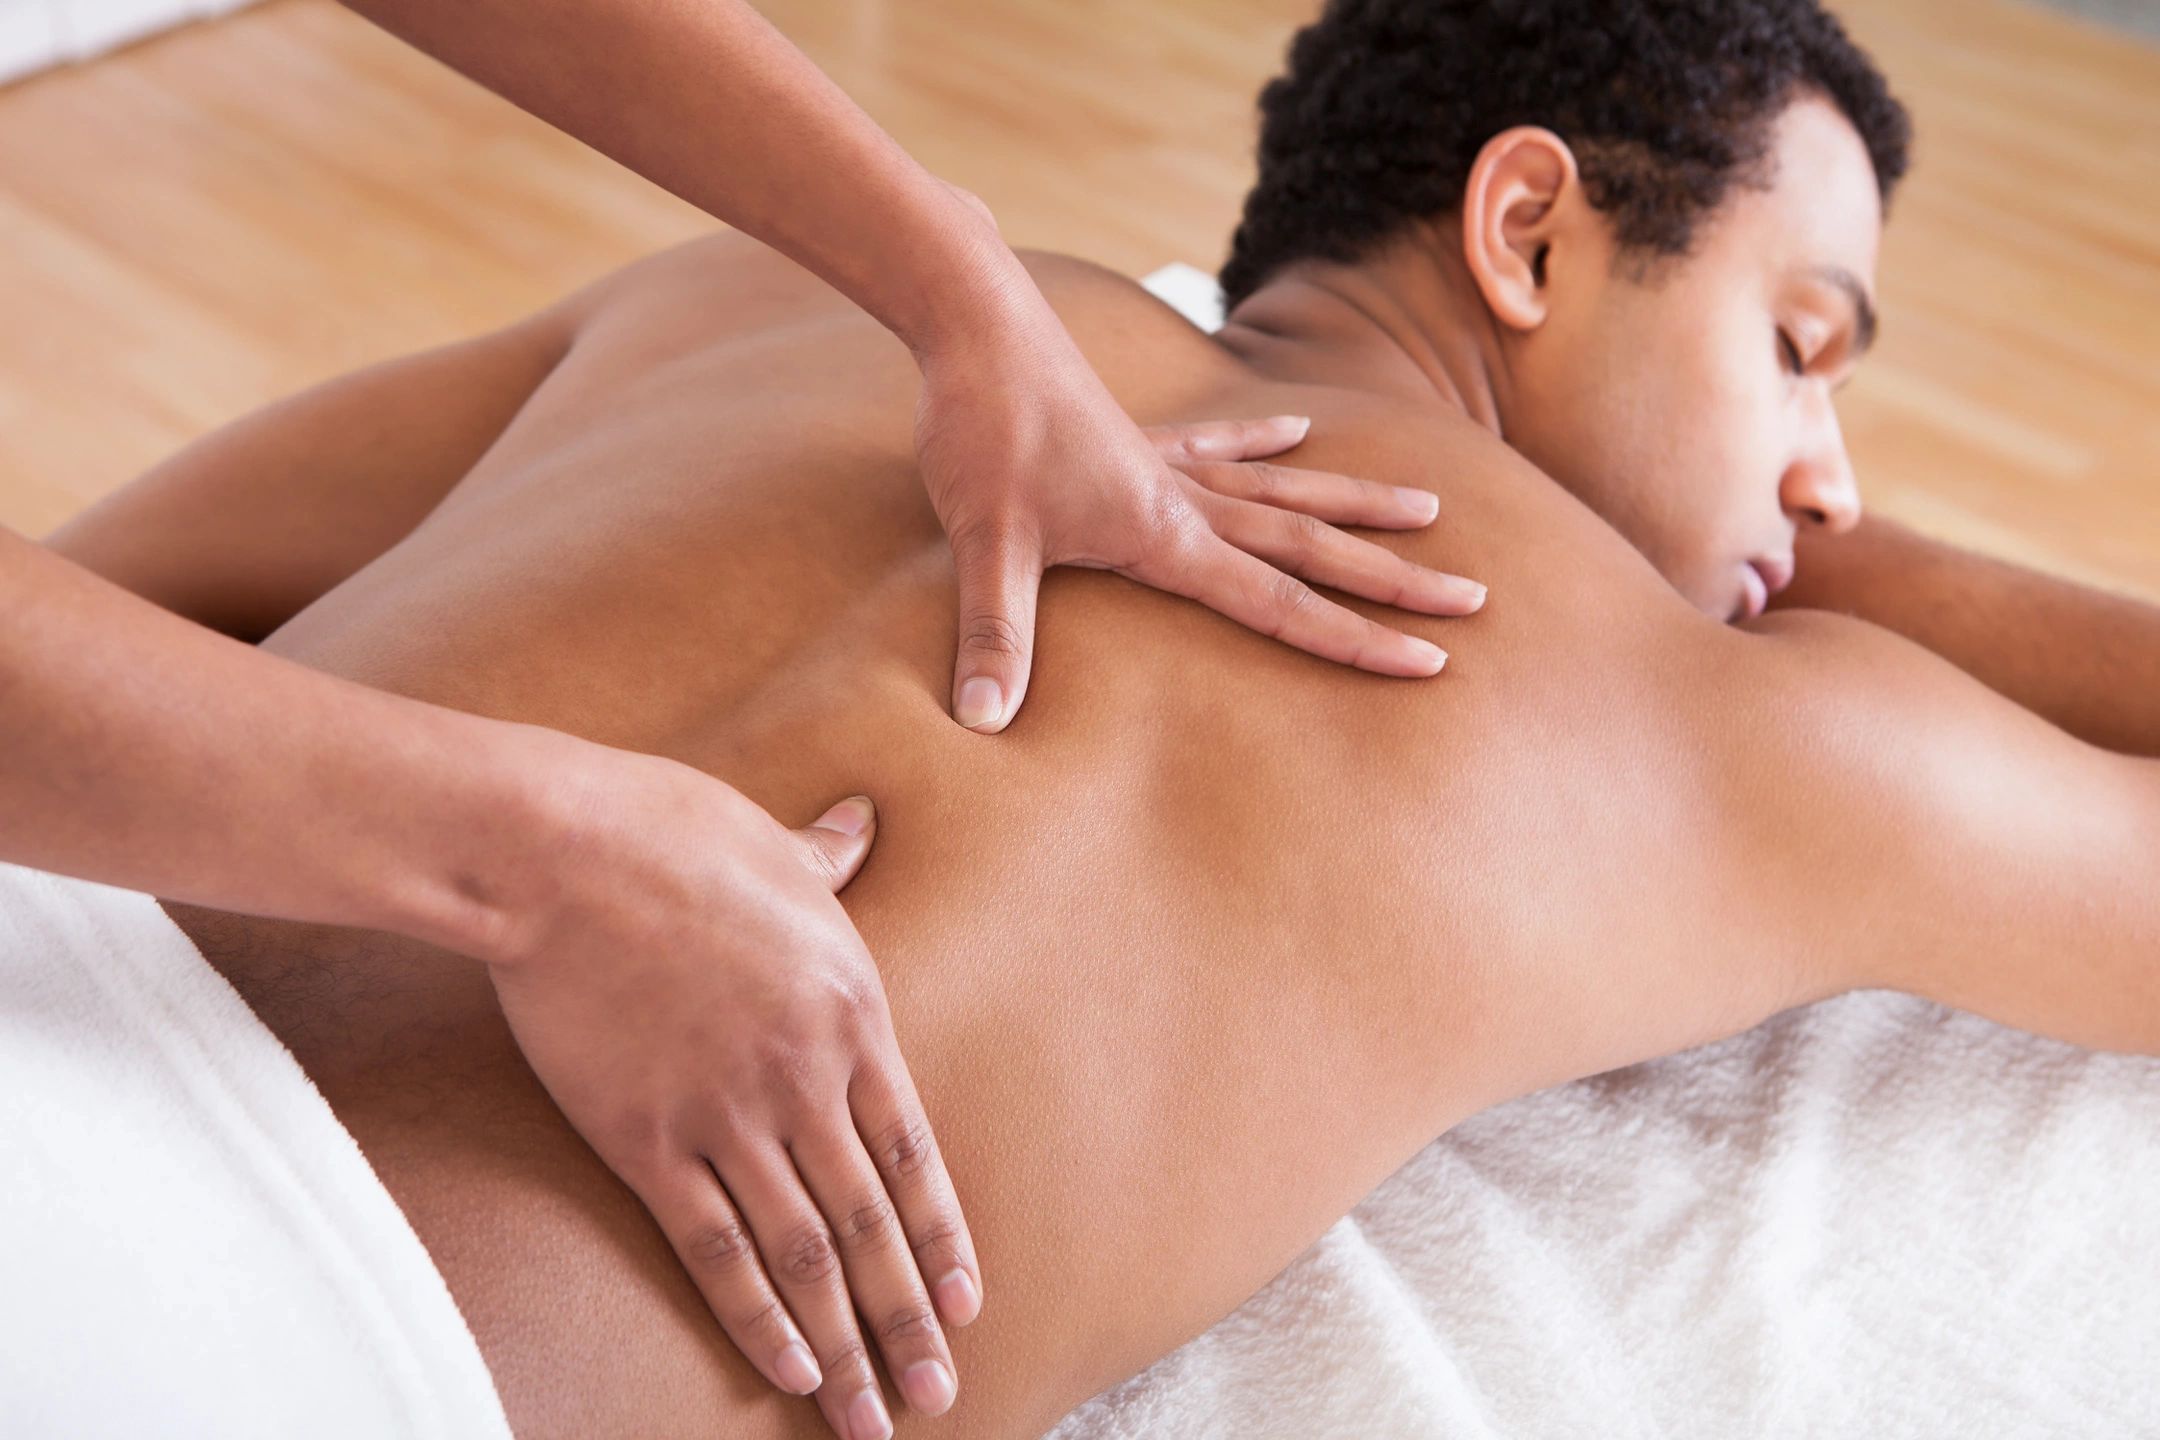 Therapeutic & Relaxation Massage Therapy